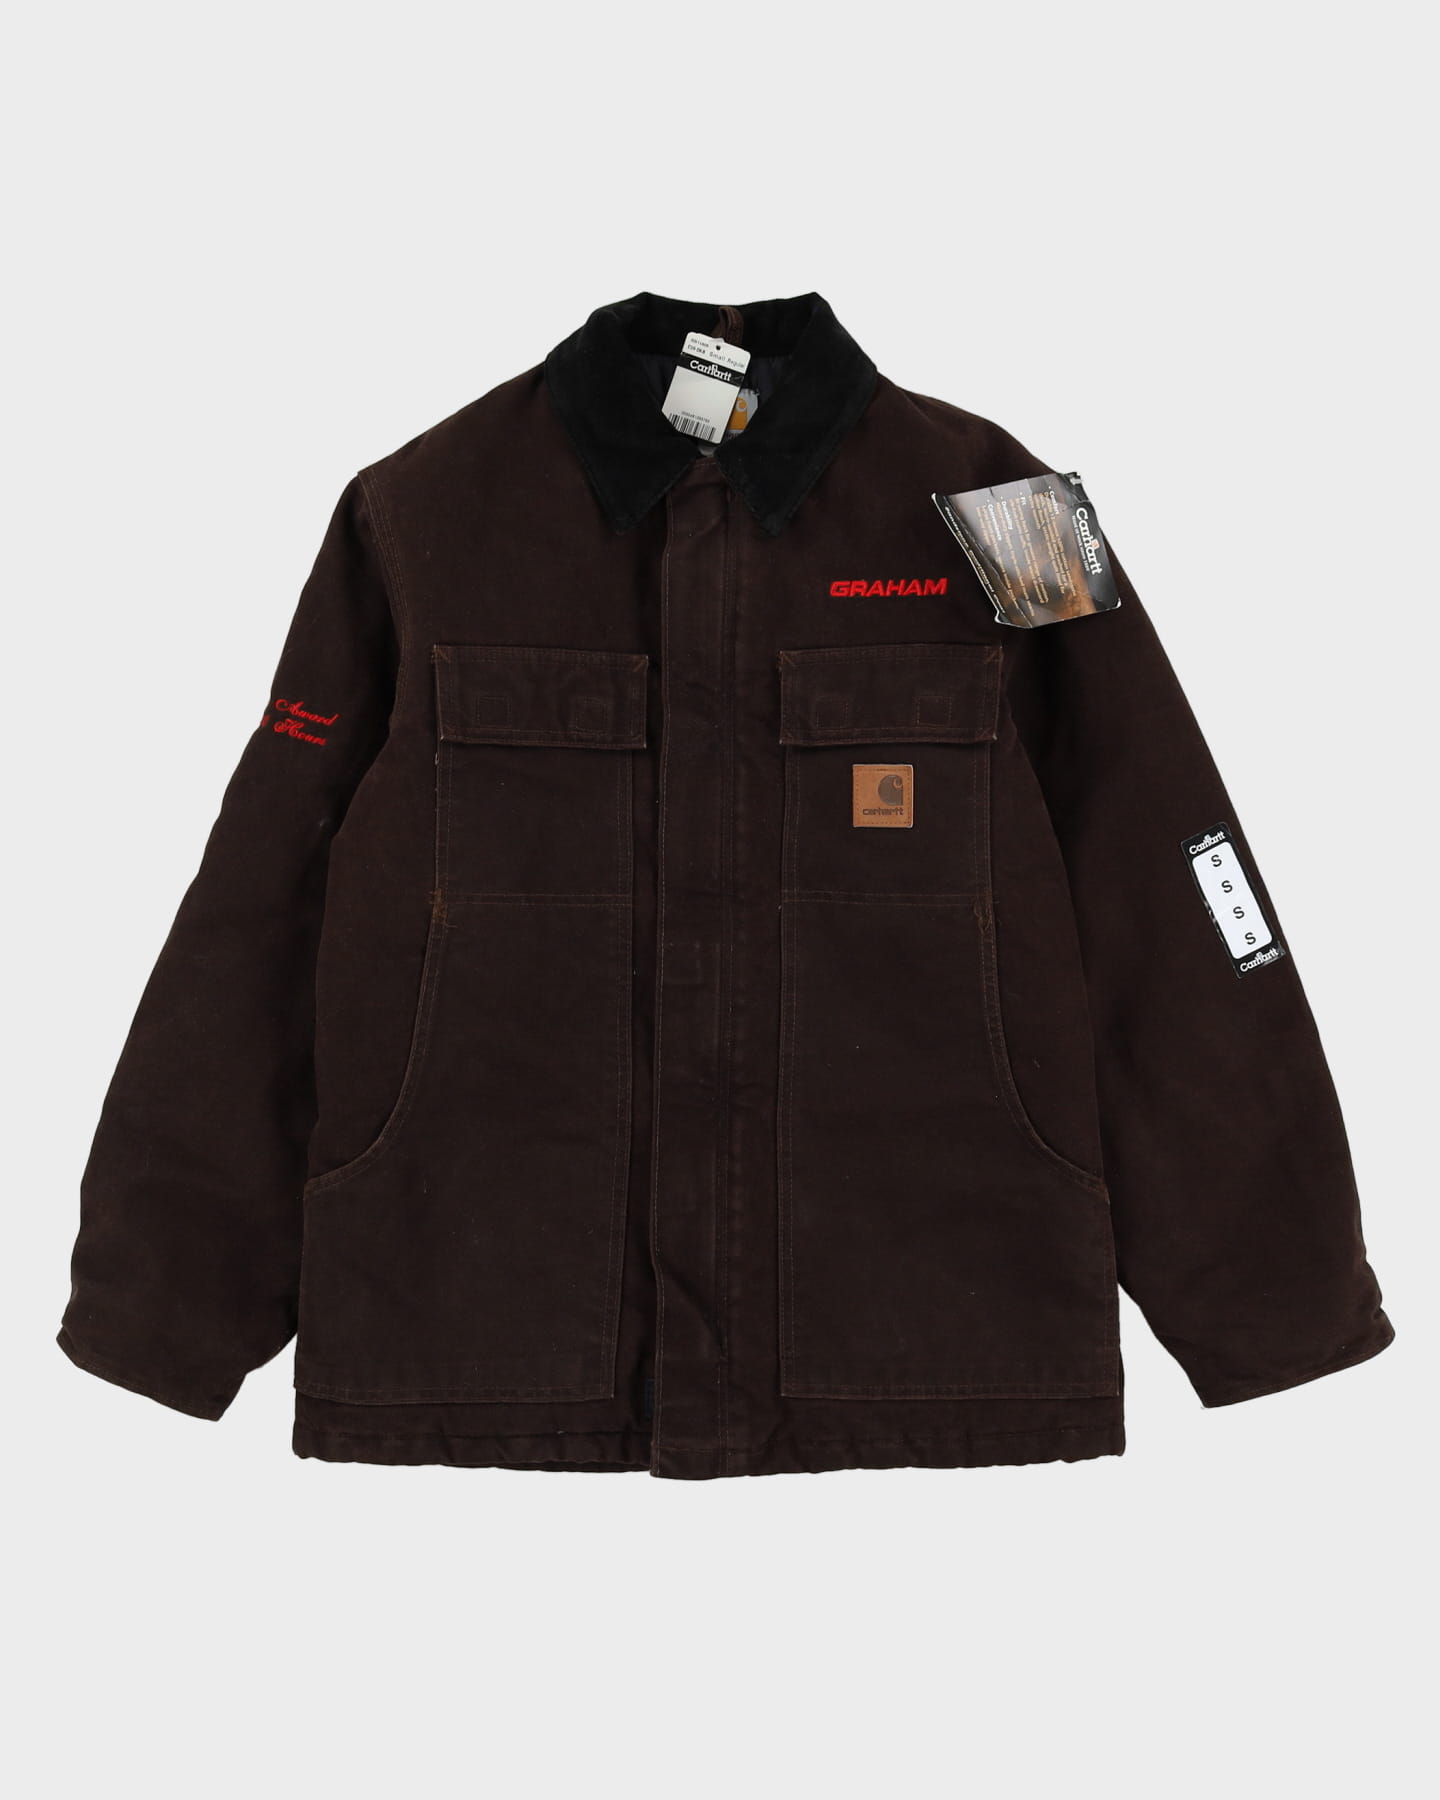 New With Tags 00s Carhartt Brown Workwear / Chore Jacket - S